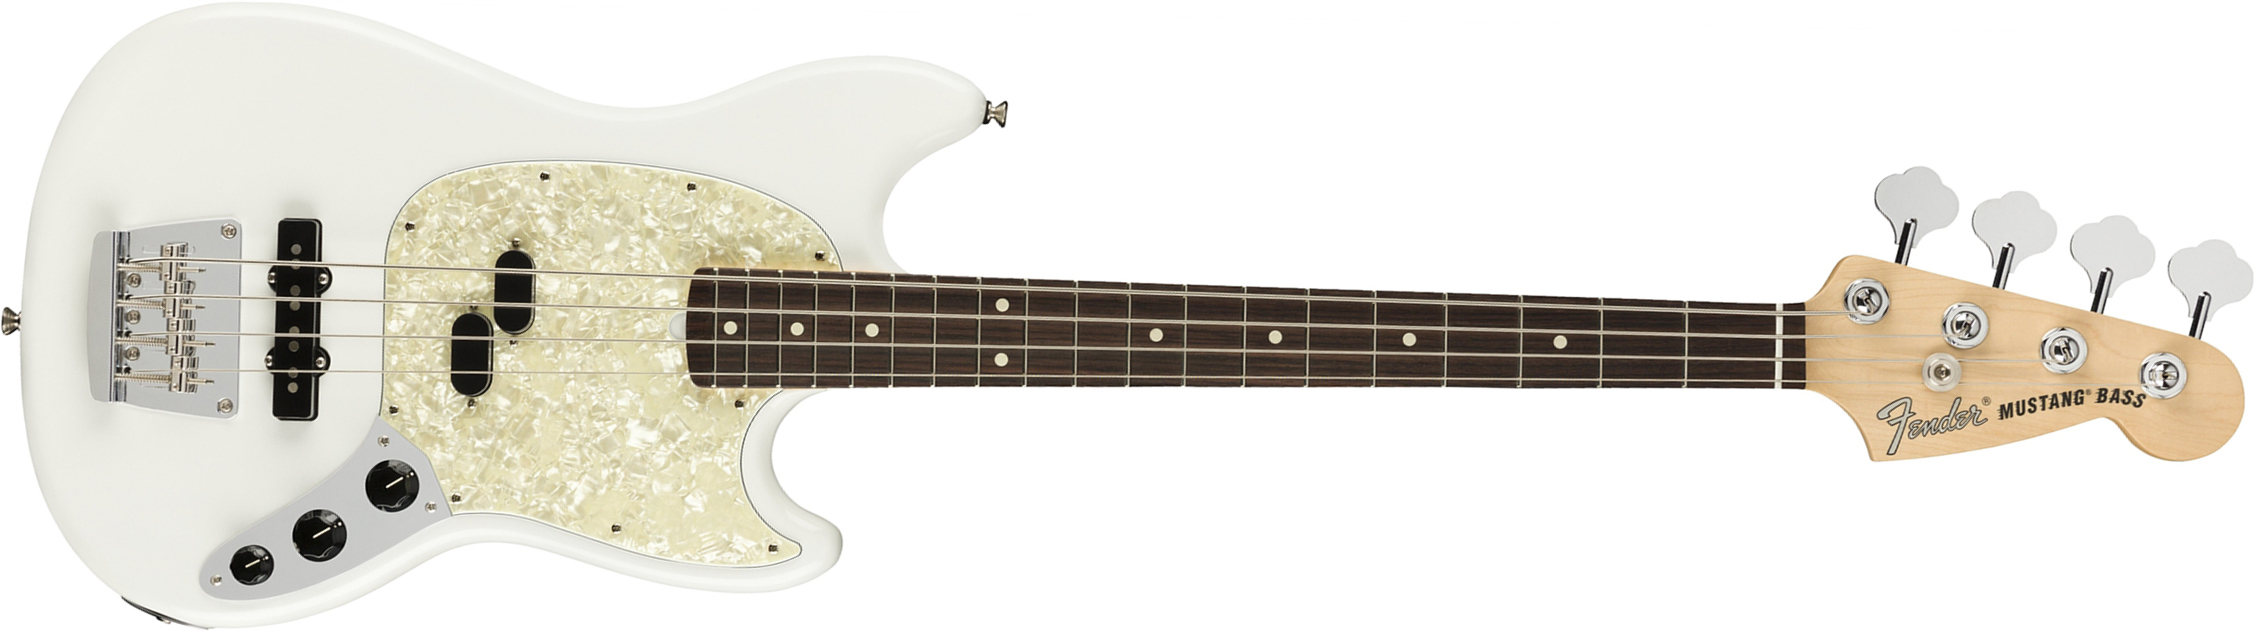 Fender Mustang Bass American Performer Usa Rw - Arctic White - Short scale elektrische bas - Main picture